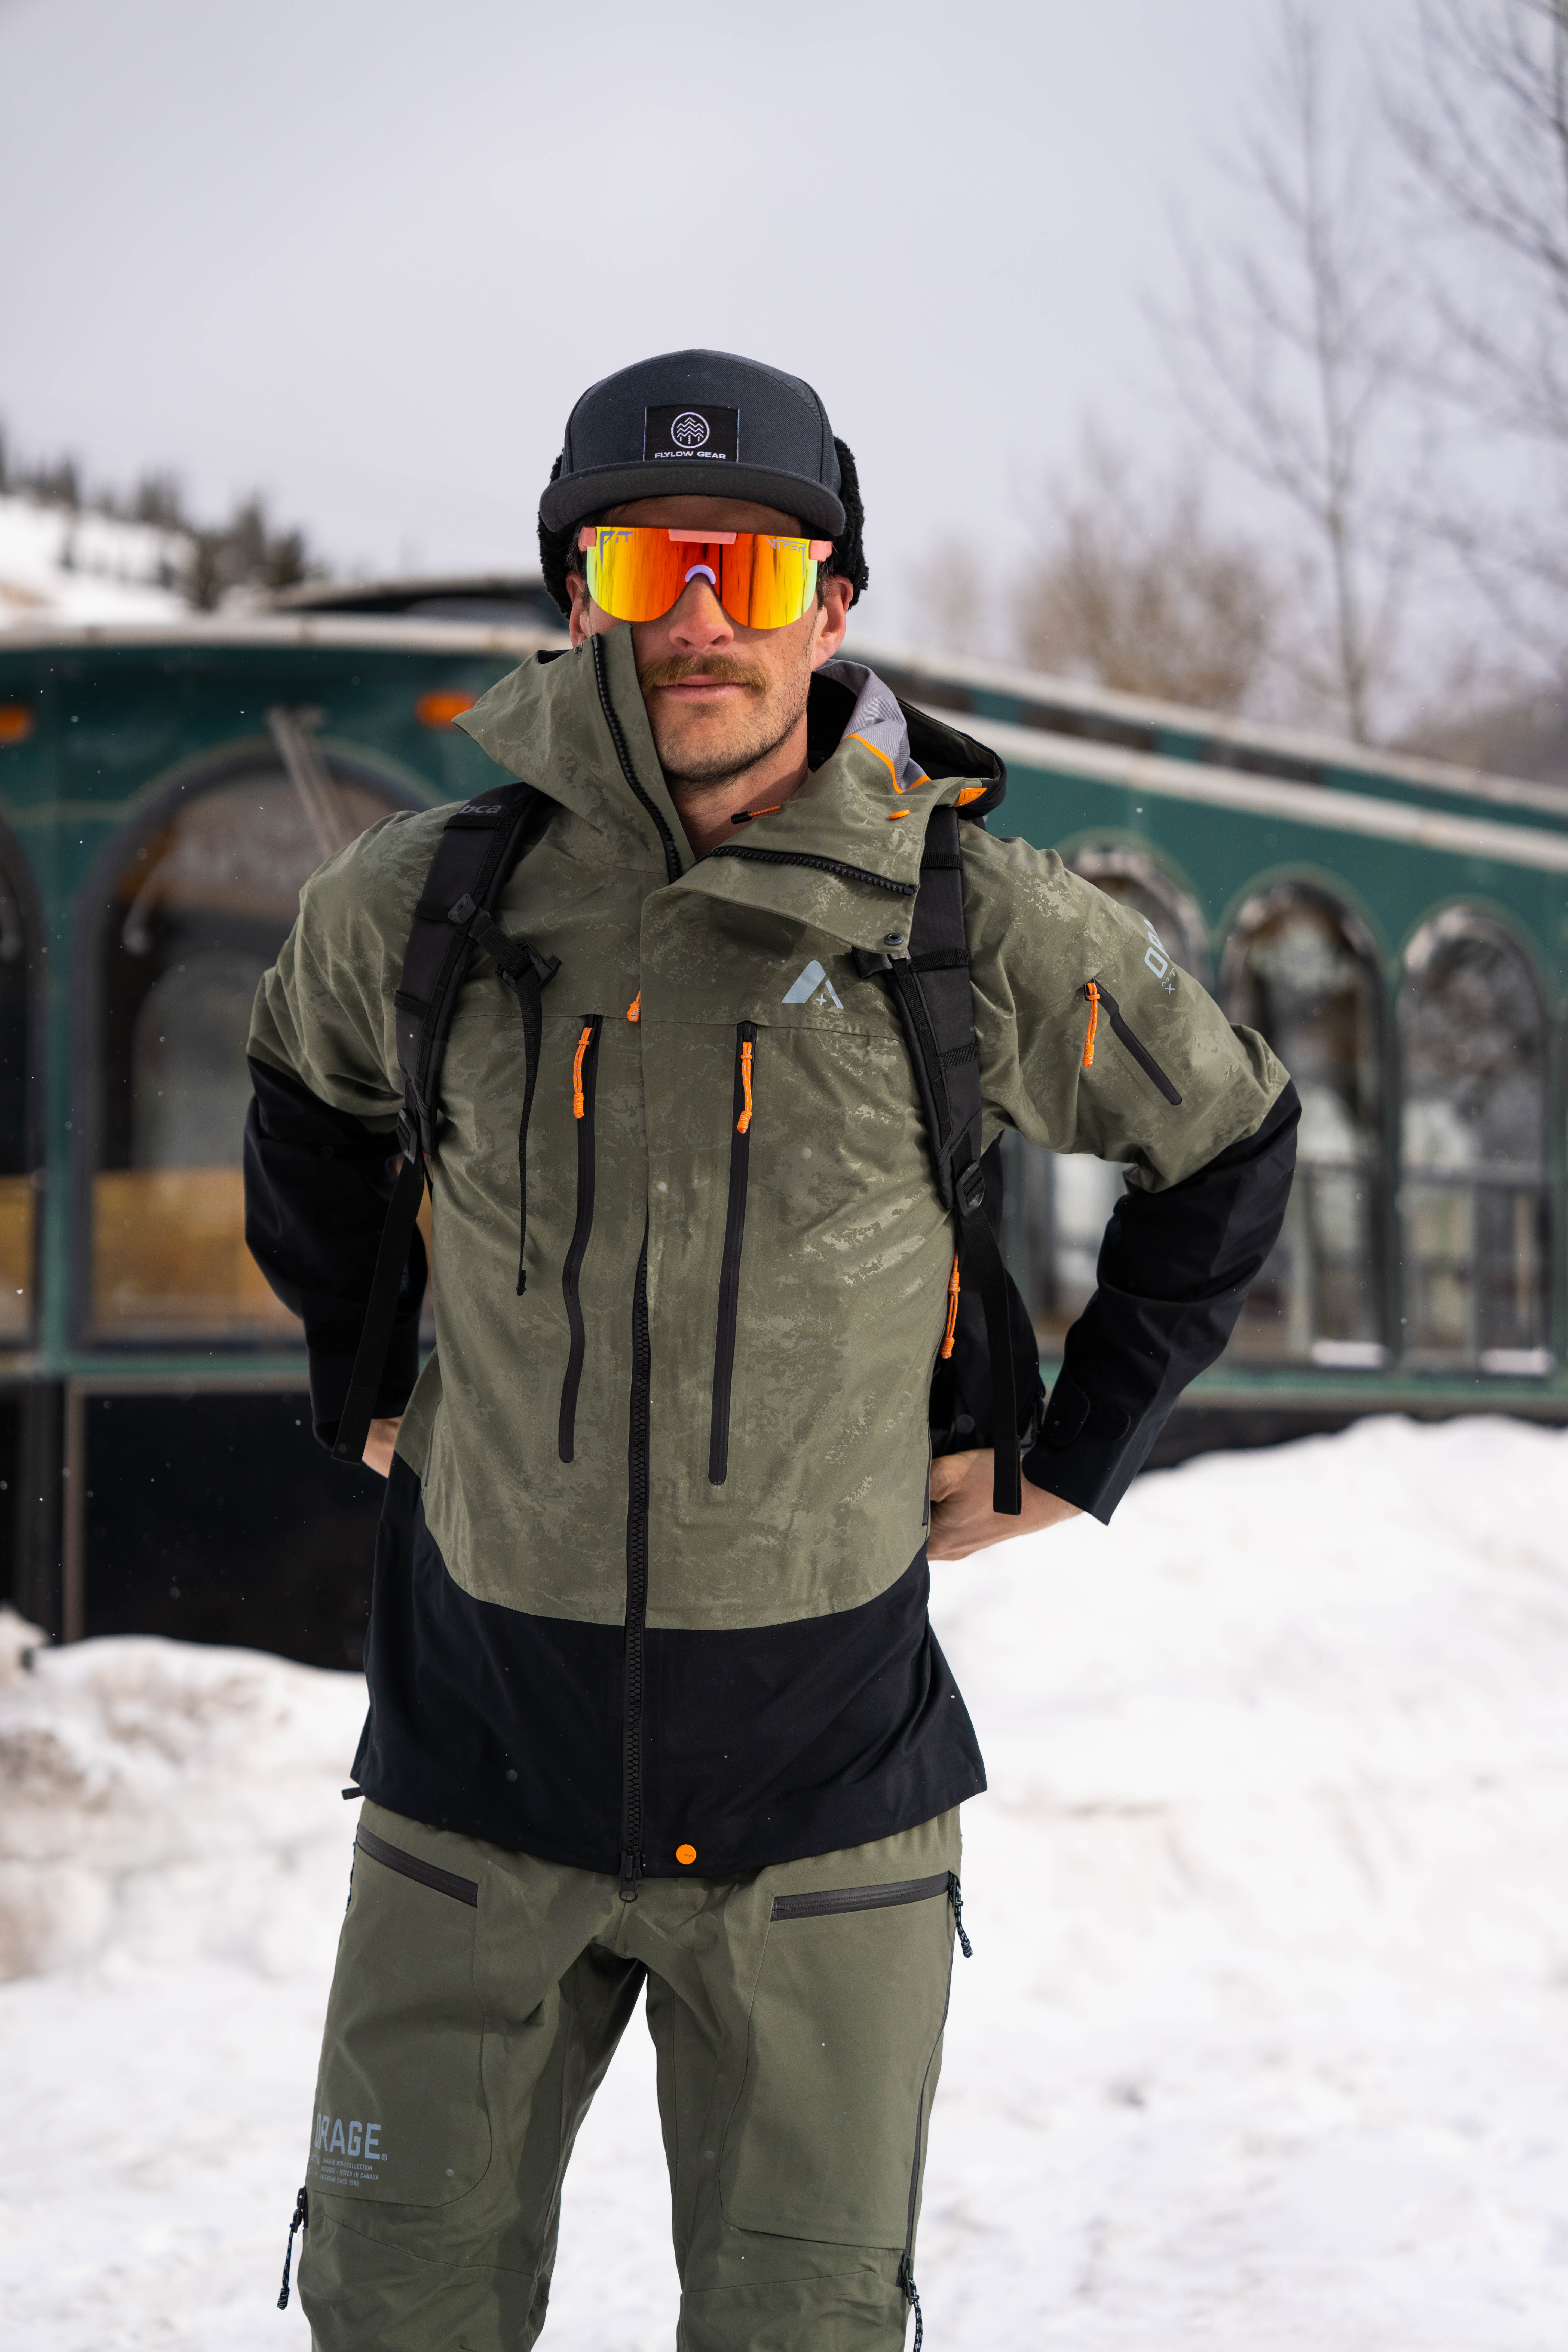 Why après-ski style is the perfect look for January 2022 – even if